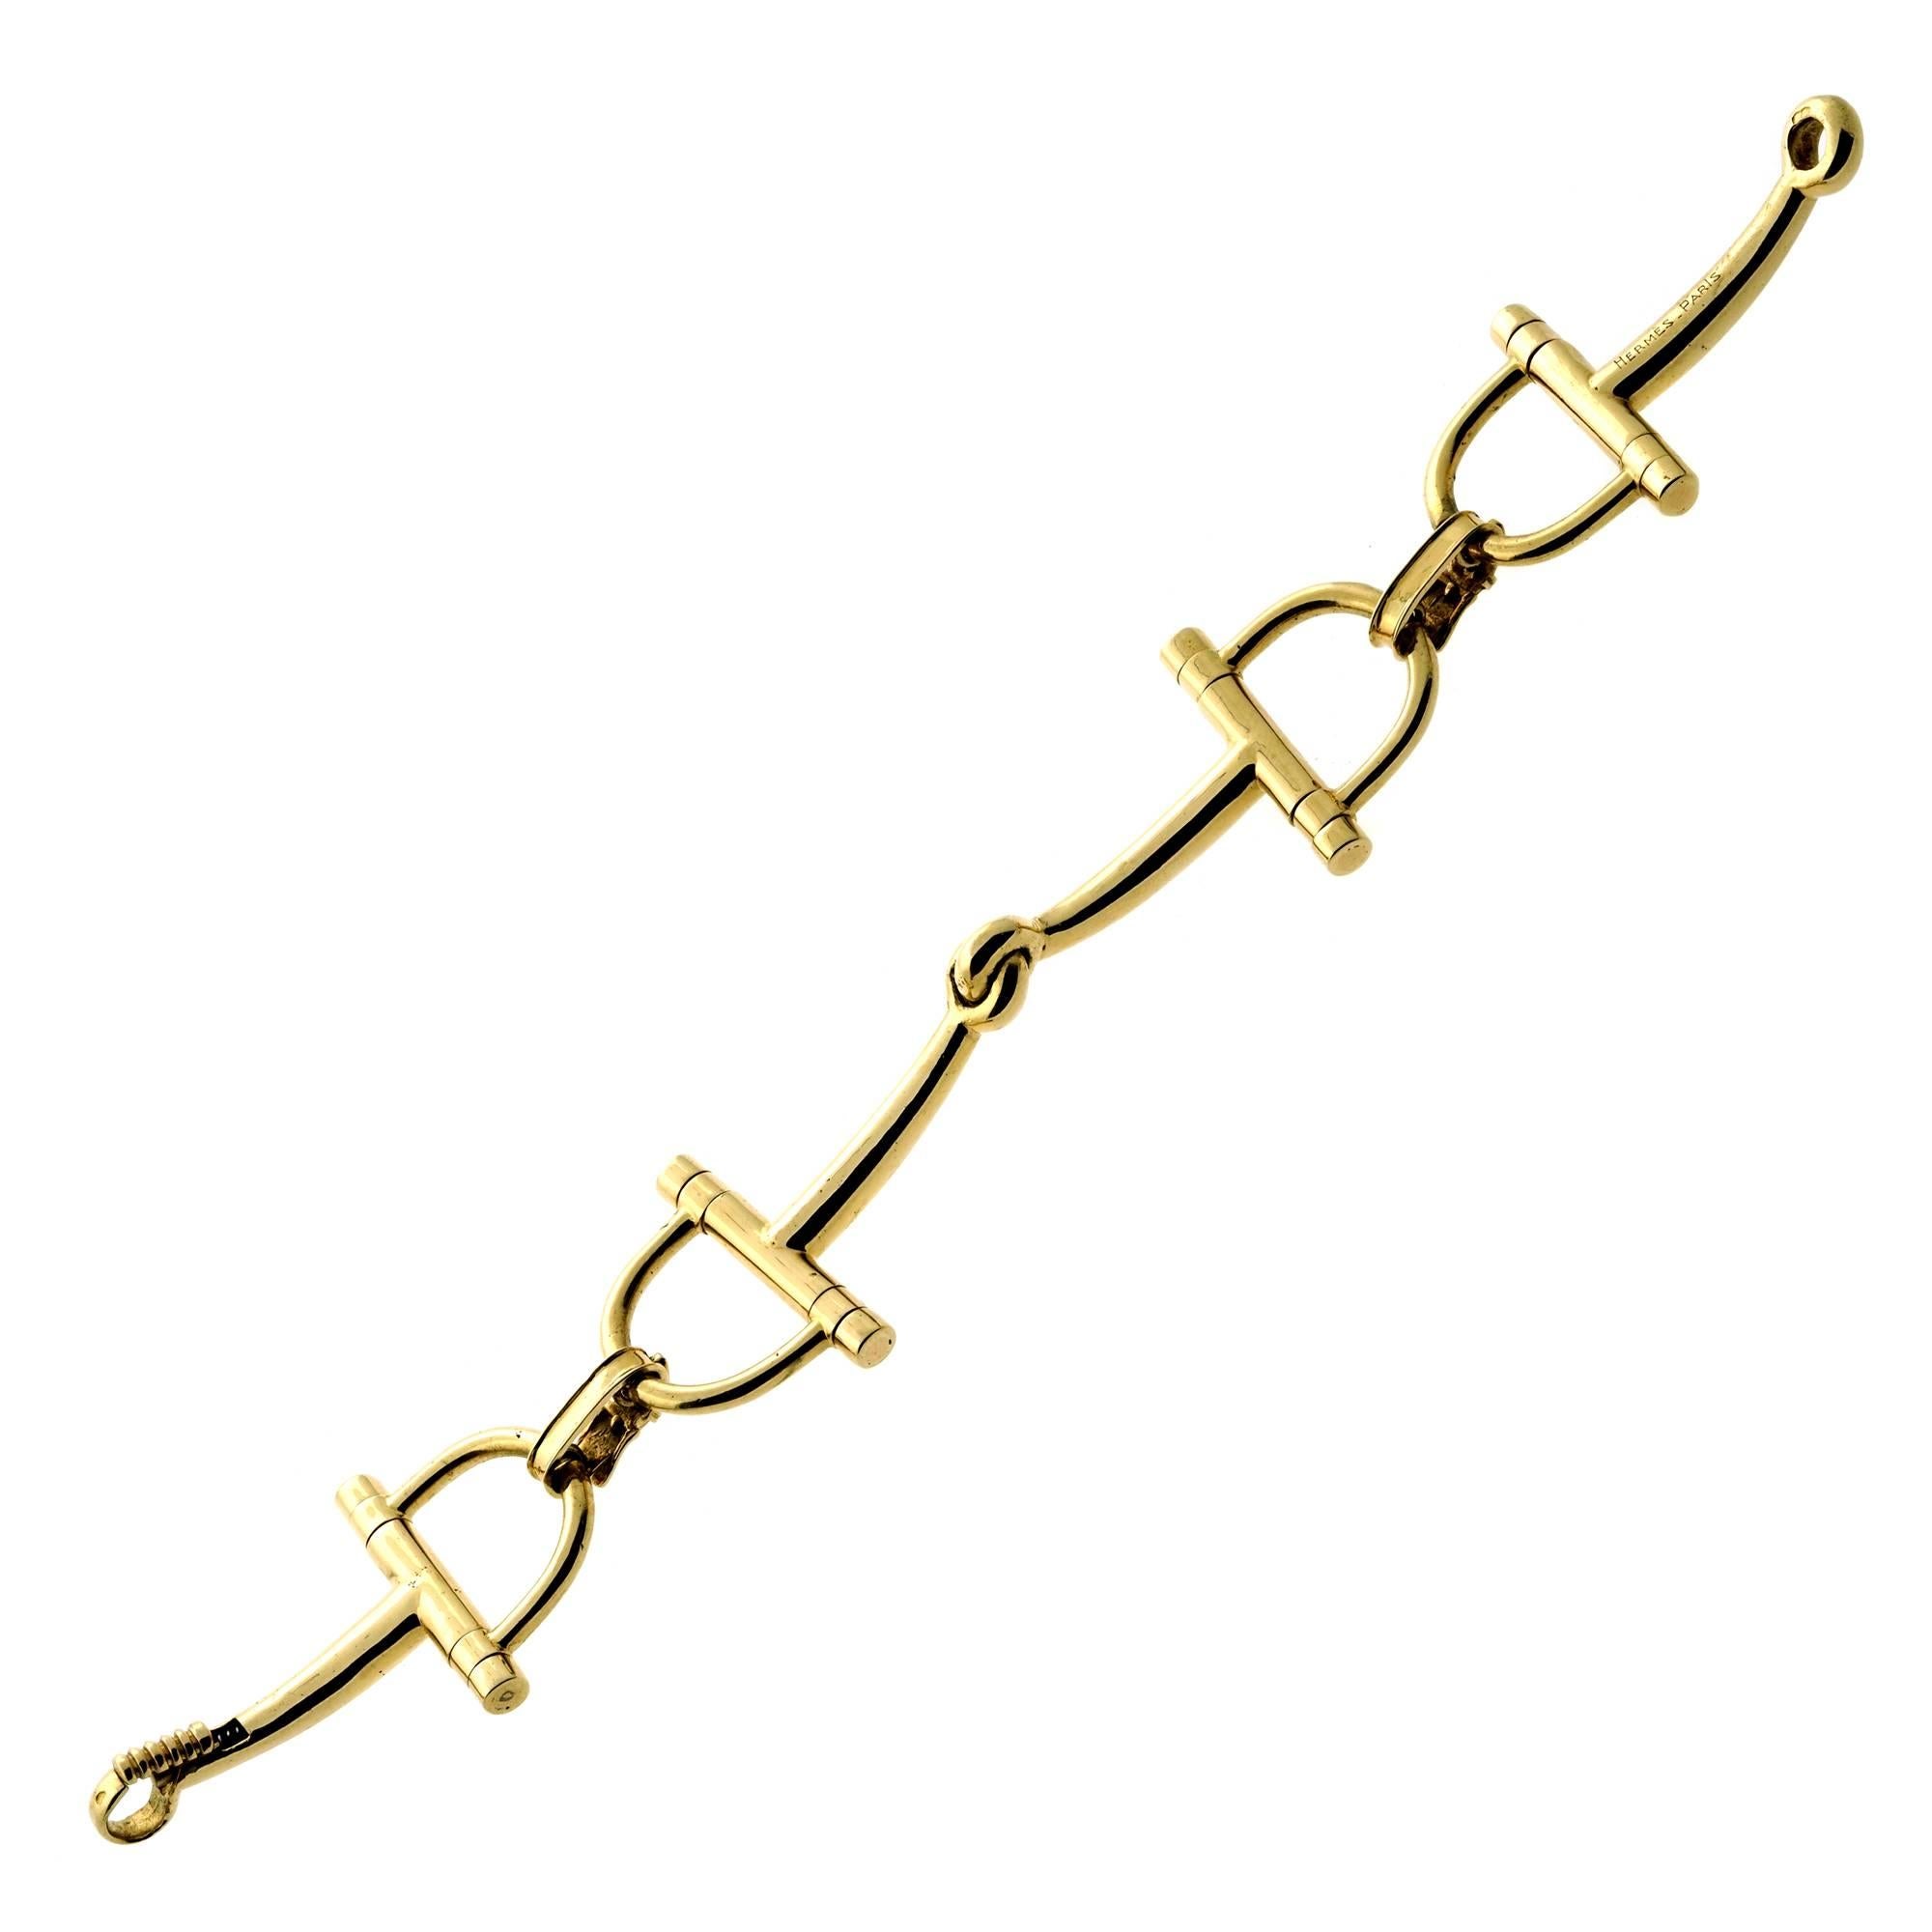 A fabulous authentic Hermes bracelet depicting the iconic stirrup motif in 18k yellow gold. This solid bracelet has a weight of 56.6 grams and measures 7 3/4